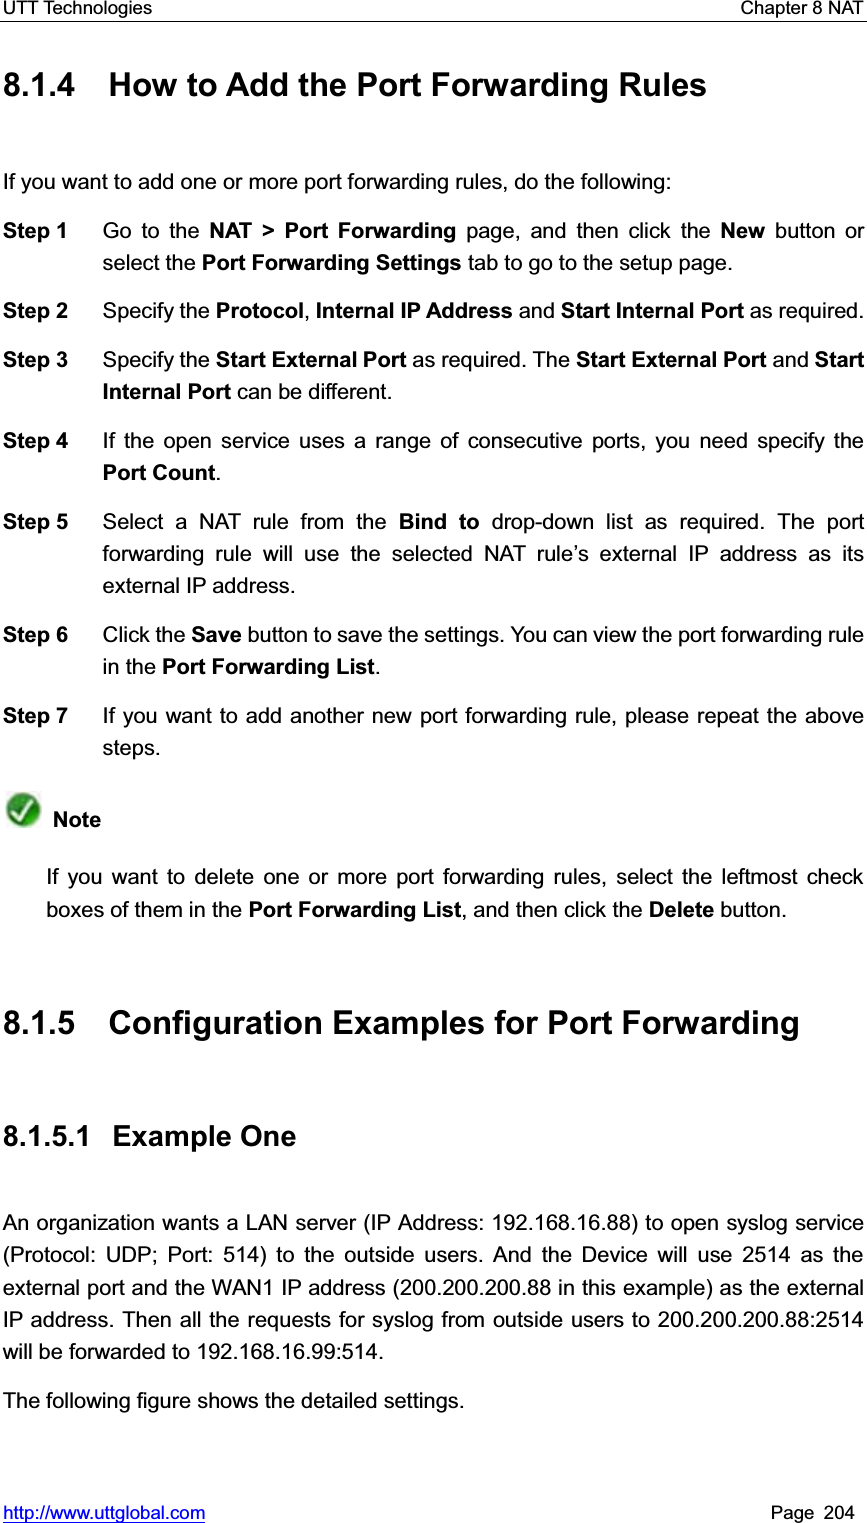 UTT Technologies    Chapter 8 NAT   http://www.uttglobal.com Page 204 8.1.4  How to Add the Port Forwarding Rules If you want to add one or more port forwarding rules, do the following:   Step 1  Go to the NAT &gt; Port Forwarding page, and then click the New button or select the Port Forwarding Settings tab to go to the setup page. Step 2  Specify the Protocol, Internal IP Address and Start Internal Port as required.   Step 3  Specify the Start External Port as required. The Start External Port and Start Internal Port can be different. Step 4  If the open service uses a range of consecutive ports, you need specify thePort Count.Step 5  Select a NAT rule from the Bind to drop-down list as required. The port forwarding rule will use the selected NAT rule¶s external IP address as its external IP address. Step 6  Click the Save button to save the settings. You can view the port forwarding rule in the Port Forwarding List.Step 7  If you want to add another new port forwarding rule, please repeat the above steps. NoteIf you want to delete one or more port forwarding rules, select the leftmost check boxes of them in the Port Forwarding List, and then click the Delete button. 8.1.5  Configuration Examples for Port Forwarding 8.1.5.1 Example One  An organization wants a LAN server (IP Address: 192.168.16.88) to open syslog service (Protocol: UDP; Port: 514) to the outside users. And the Device will use 2514 as the external port and the WAN1 IP address (200.200.200.88 in this example) as the external IP address. Then all the requests for syslog from outside users to 200.200.200.88:2514 will be forwarded to 192.168.16.99:514.The following figure shows the detailed settings. 